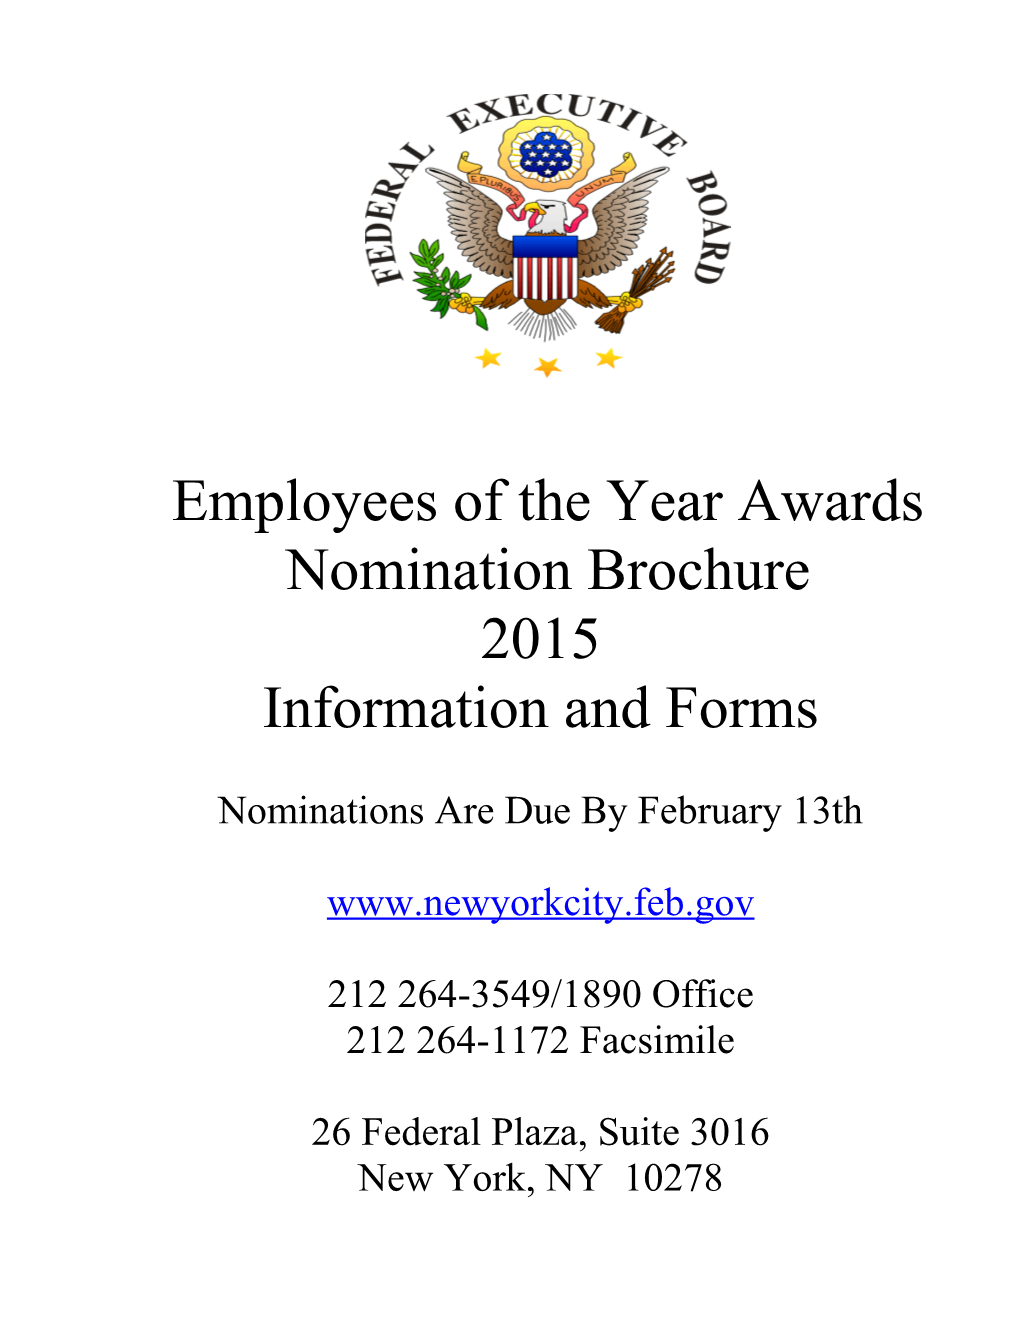 Employees of the Year Awards Nomination Brochure